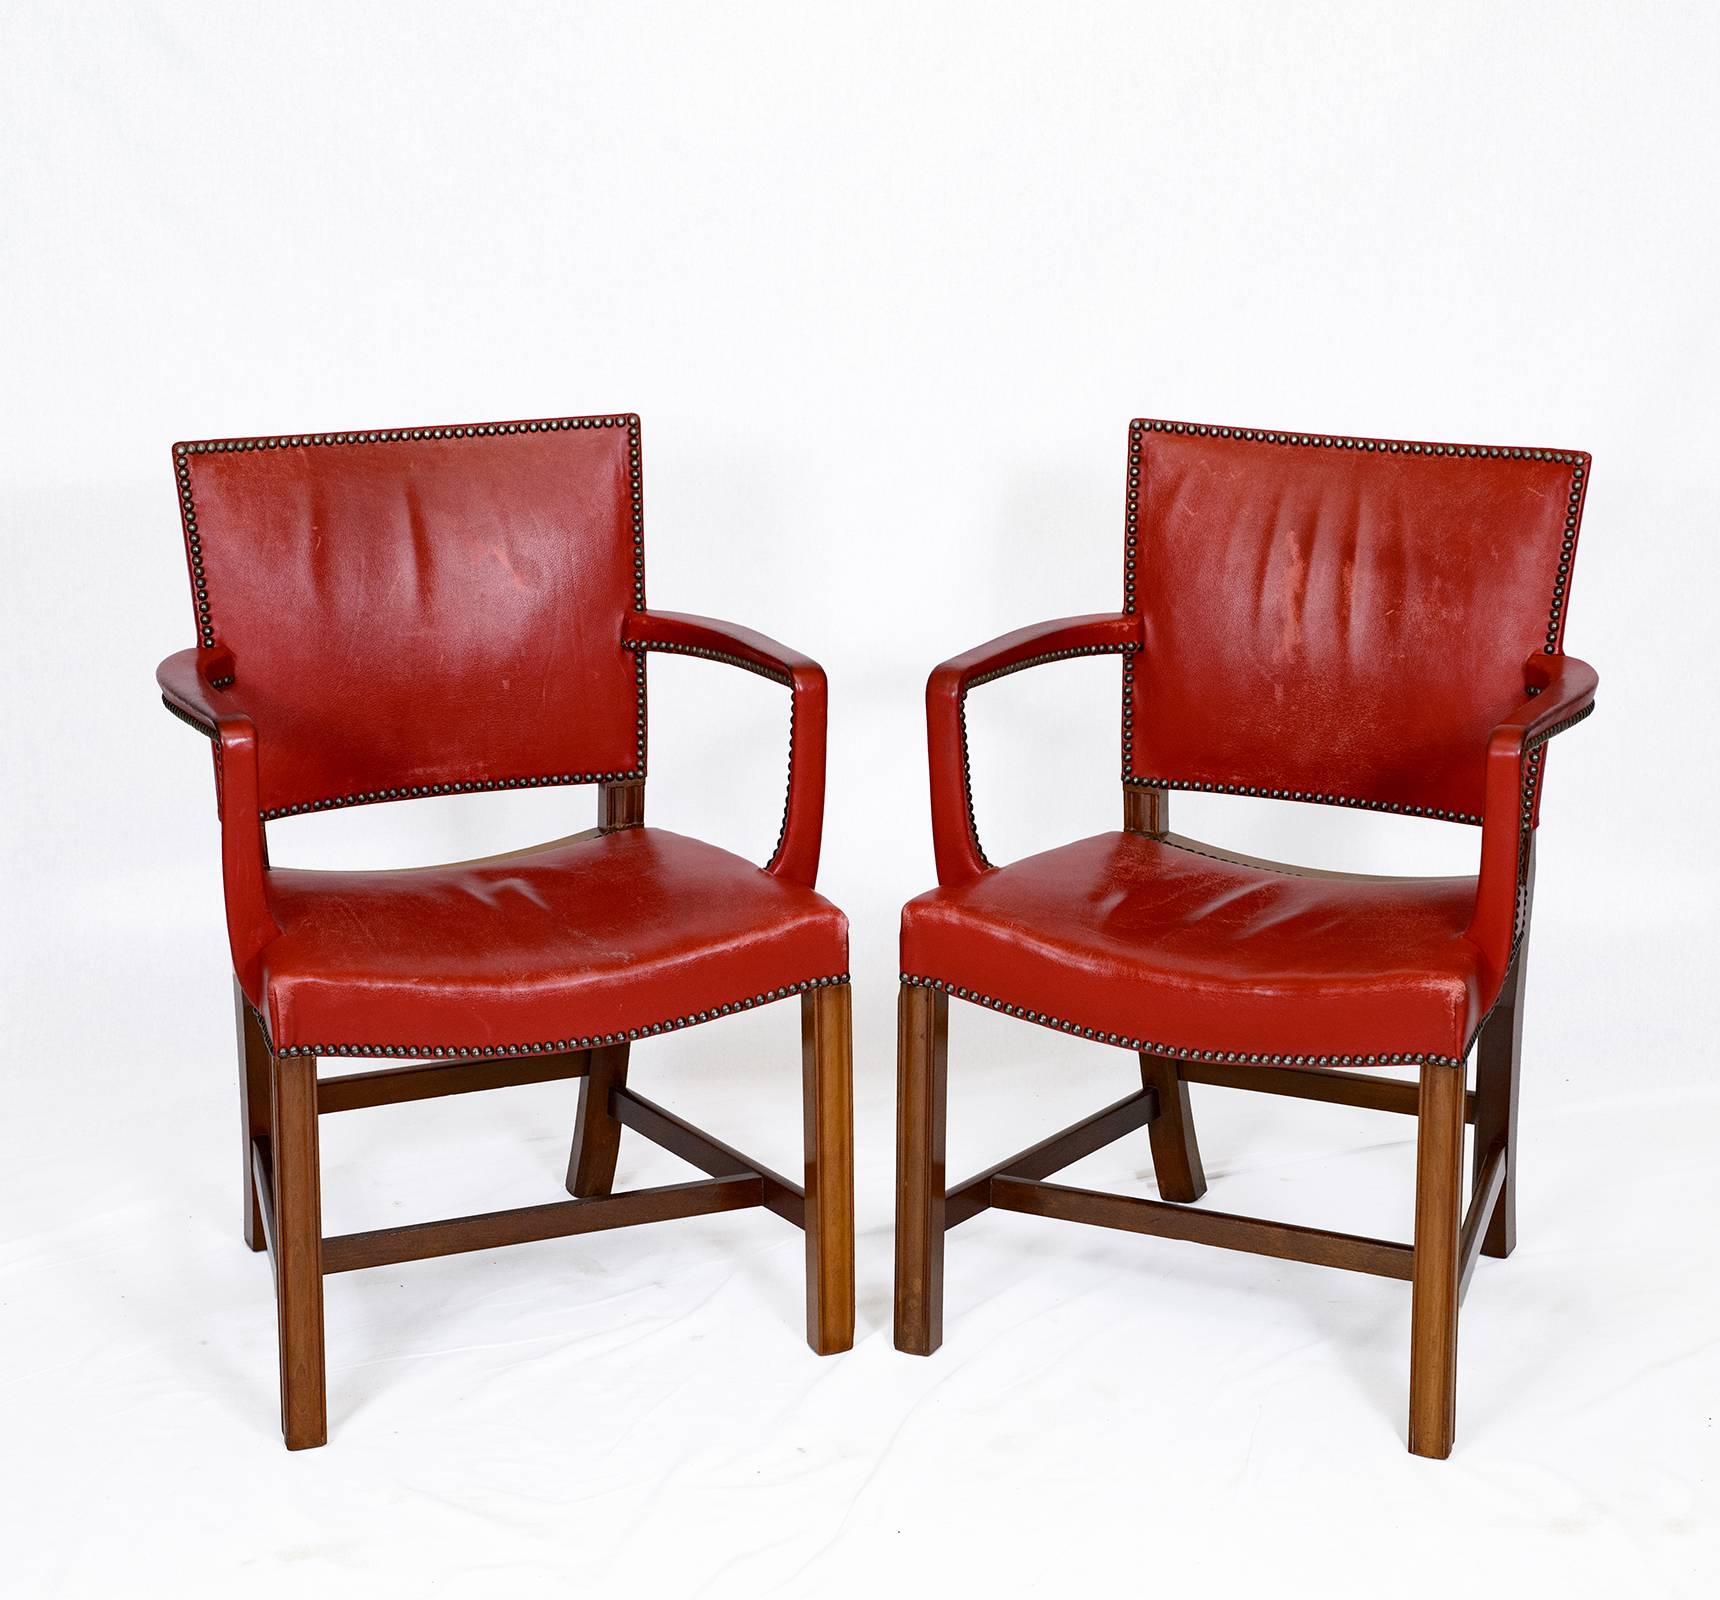 Pair of Kaare Klint armchairs designed in 1927 and produced by Rud Rasmussen.    Store formerly known as ARTFUL DODGER INC